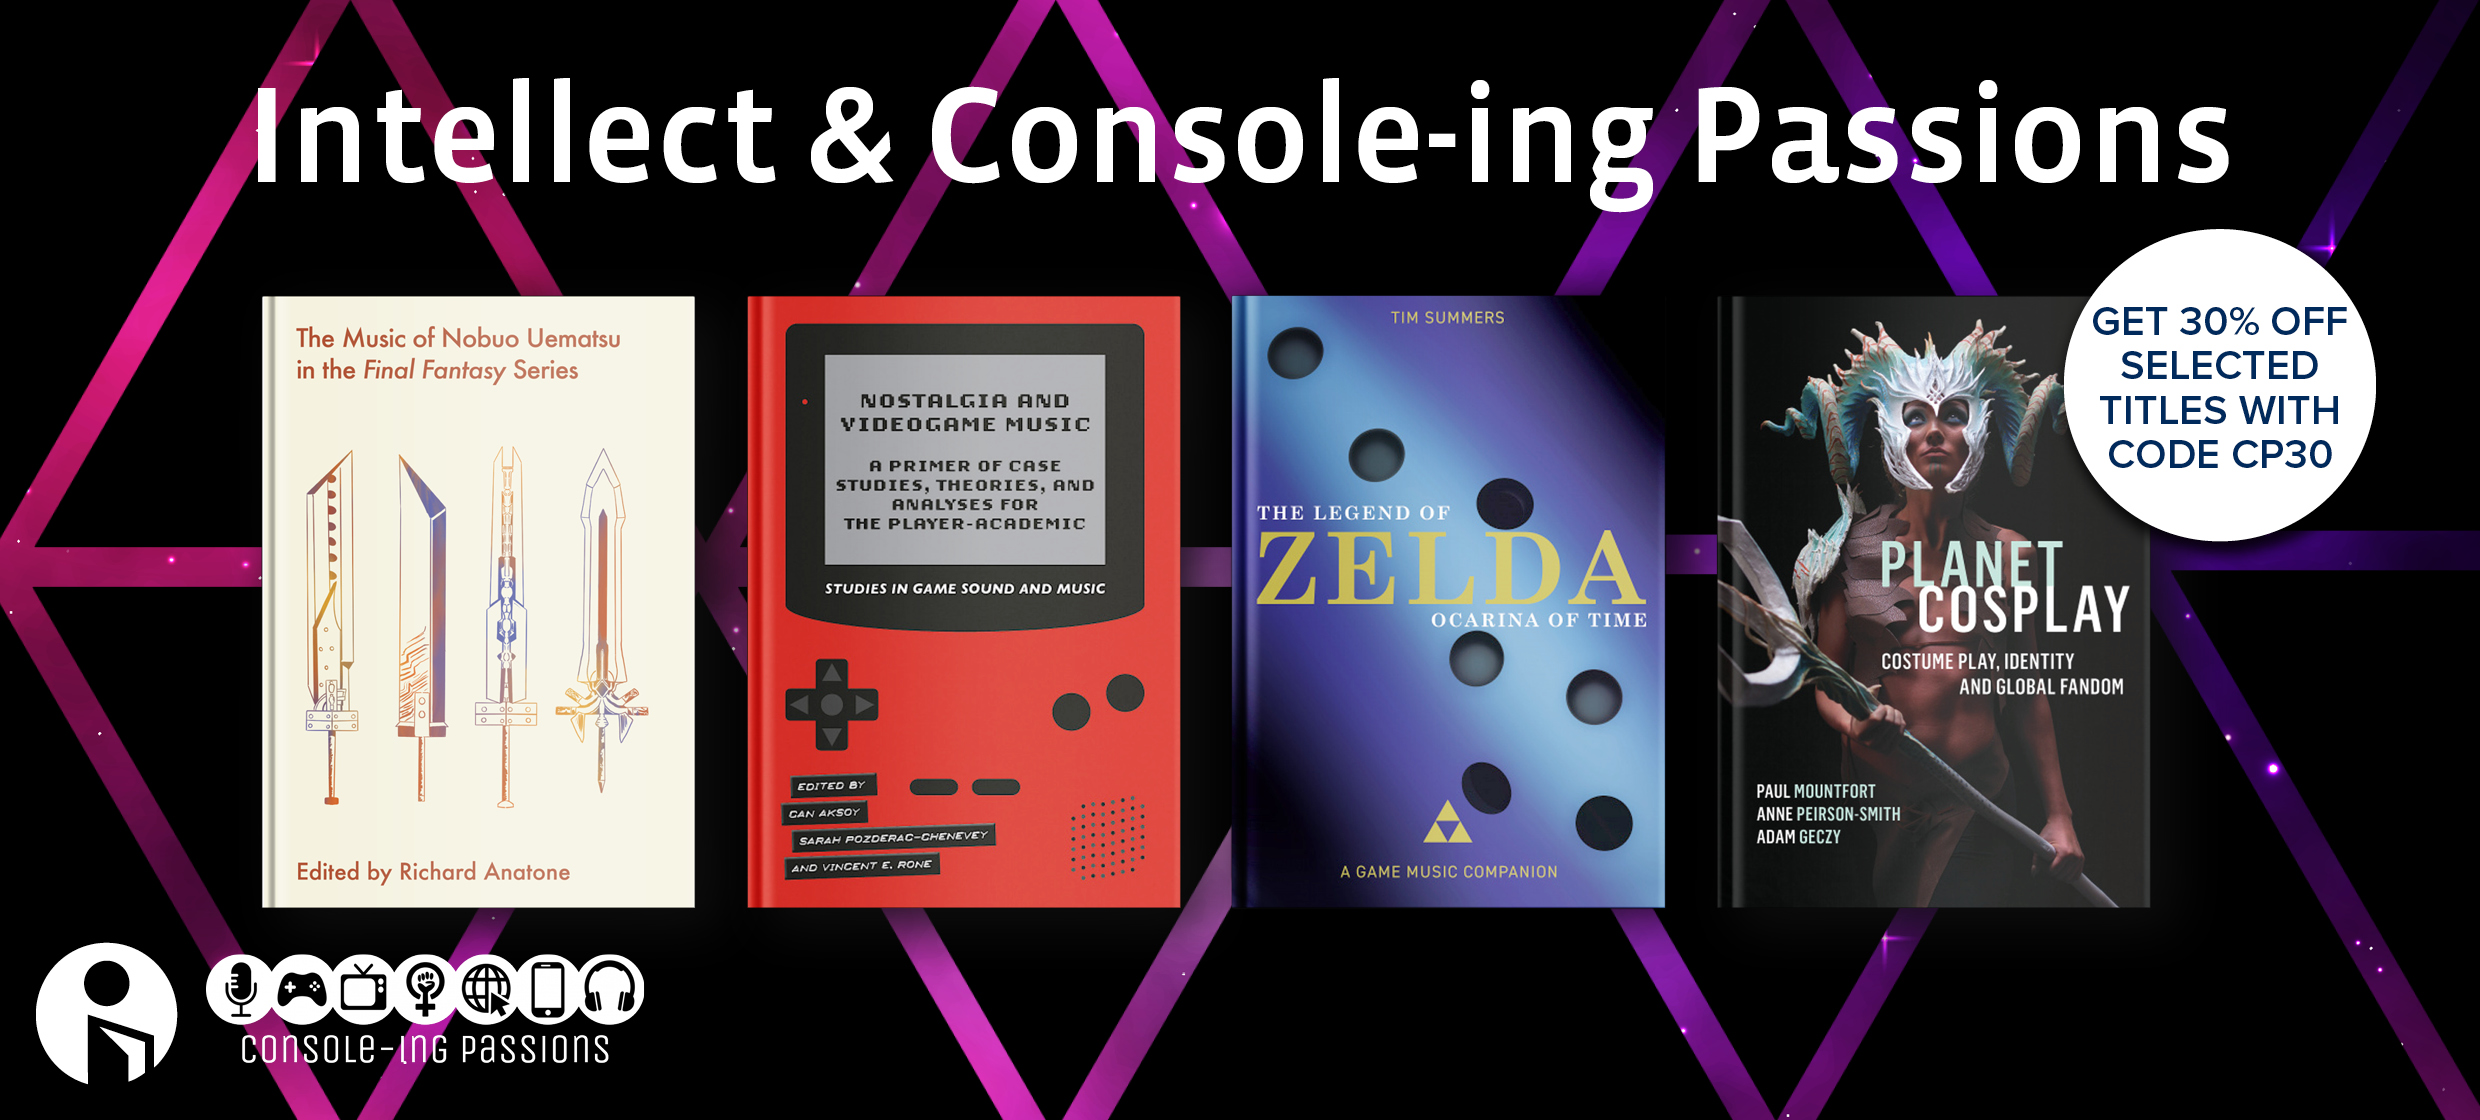 Banner showing 4 book covers in Games Studies and offering 30% off with code CP30